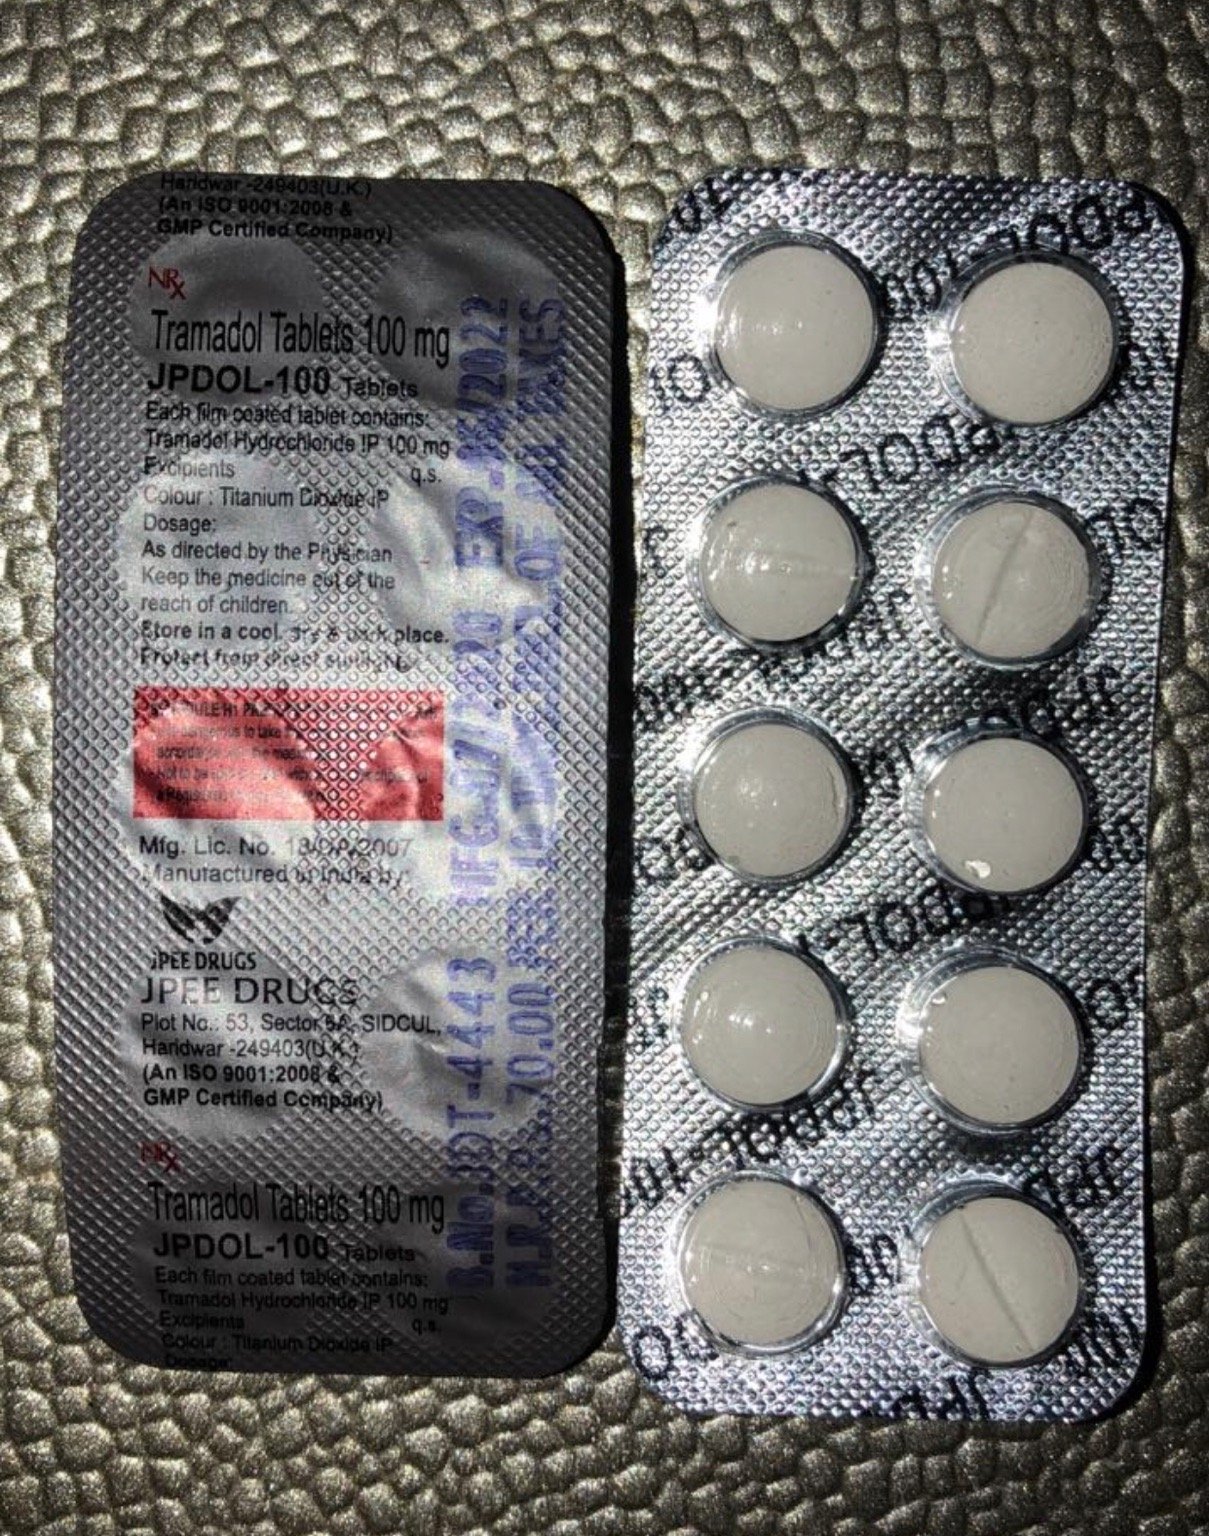 10x 100mg TRAMADOL Blister Packs [OUT OF STOCK] Image